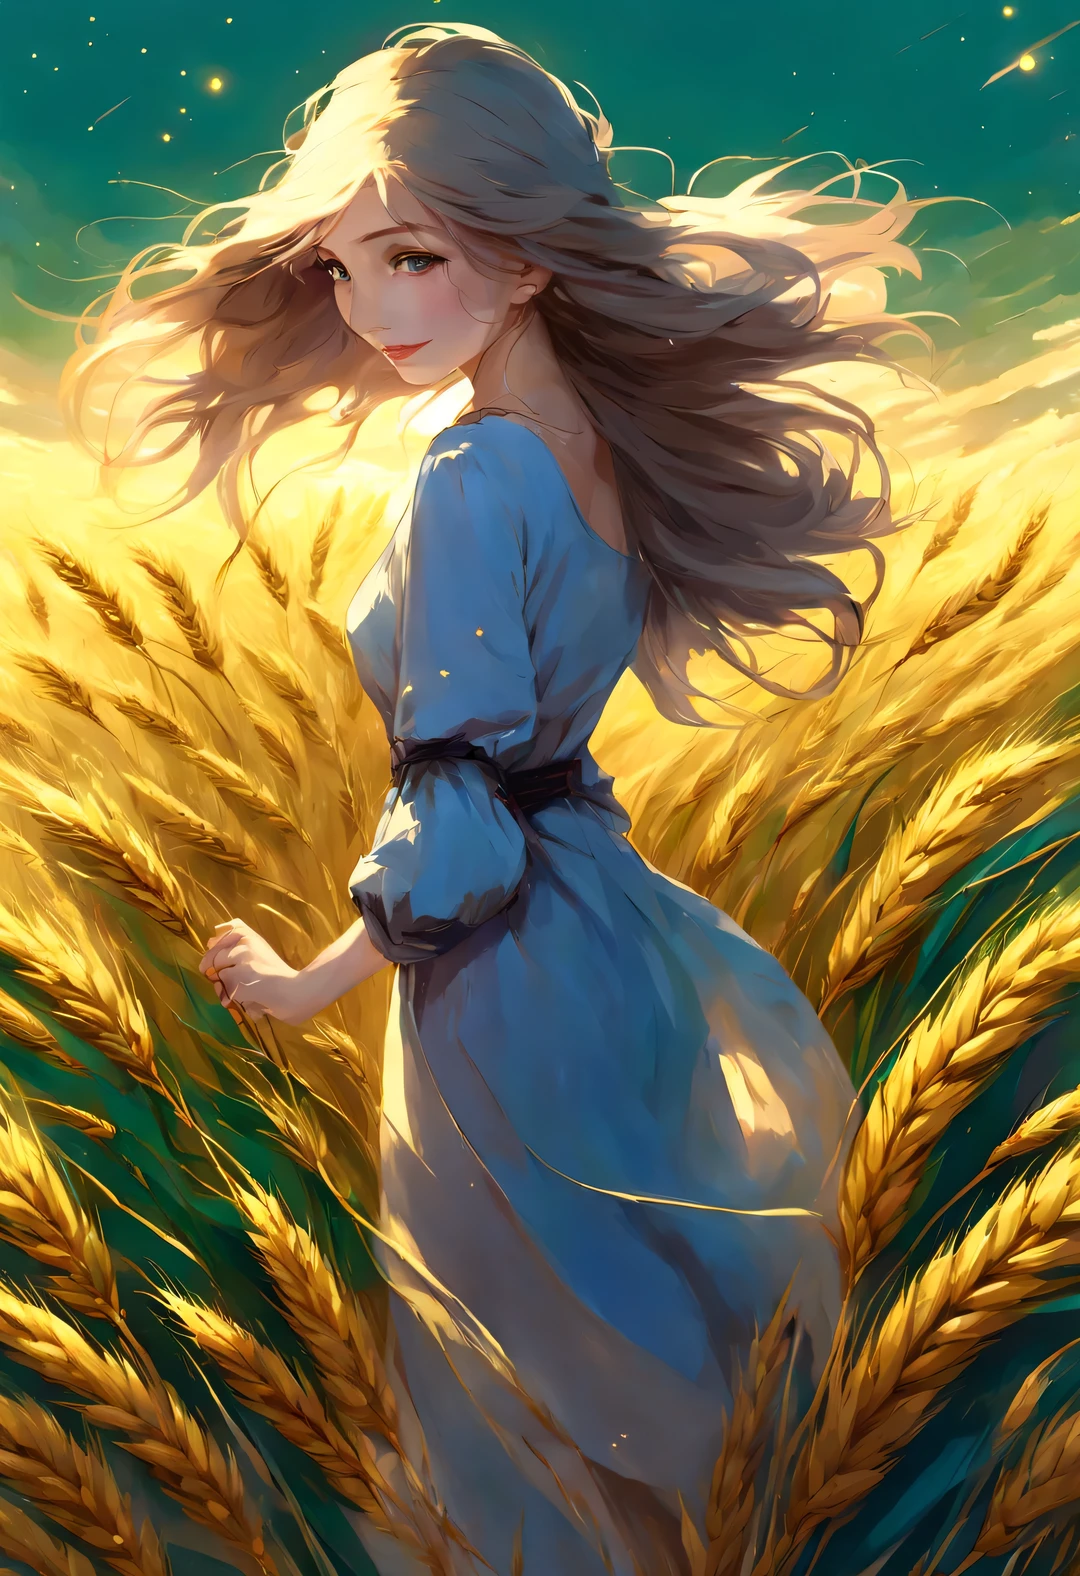 best quality, 4k, 8k, high level, masterpiece: 1.2, Super detailed, actual: 1.37,
wheat field, stagnant sky, dreamy atmosphere, bright color palette, Vibrant shades, Impressionist brushstrokes, Subtle lighting effects, sunset on the horizon, Lush green landscape, Wheat dances in the wind, Peaceful and tranquil atmosphere, Harmony between nature and sky, Playful shadows and highlights, textured brushstrokes, Abundant and vibrant crops, Endless golden wheat ears, dusk atmosphere, Tranquil pastoral scenery, The night is illuminated by shining stars, And the shining star clusters in the universe. magnificent starry night, Calm and peaceful atmosphere, Tranquil and picturesque setting inspired by Van Gogh&#39;s style and technique, Describe the noble atmosphere, ethereal beauty, and fascinating celestial phenomena.